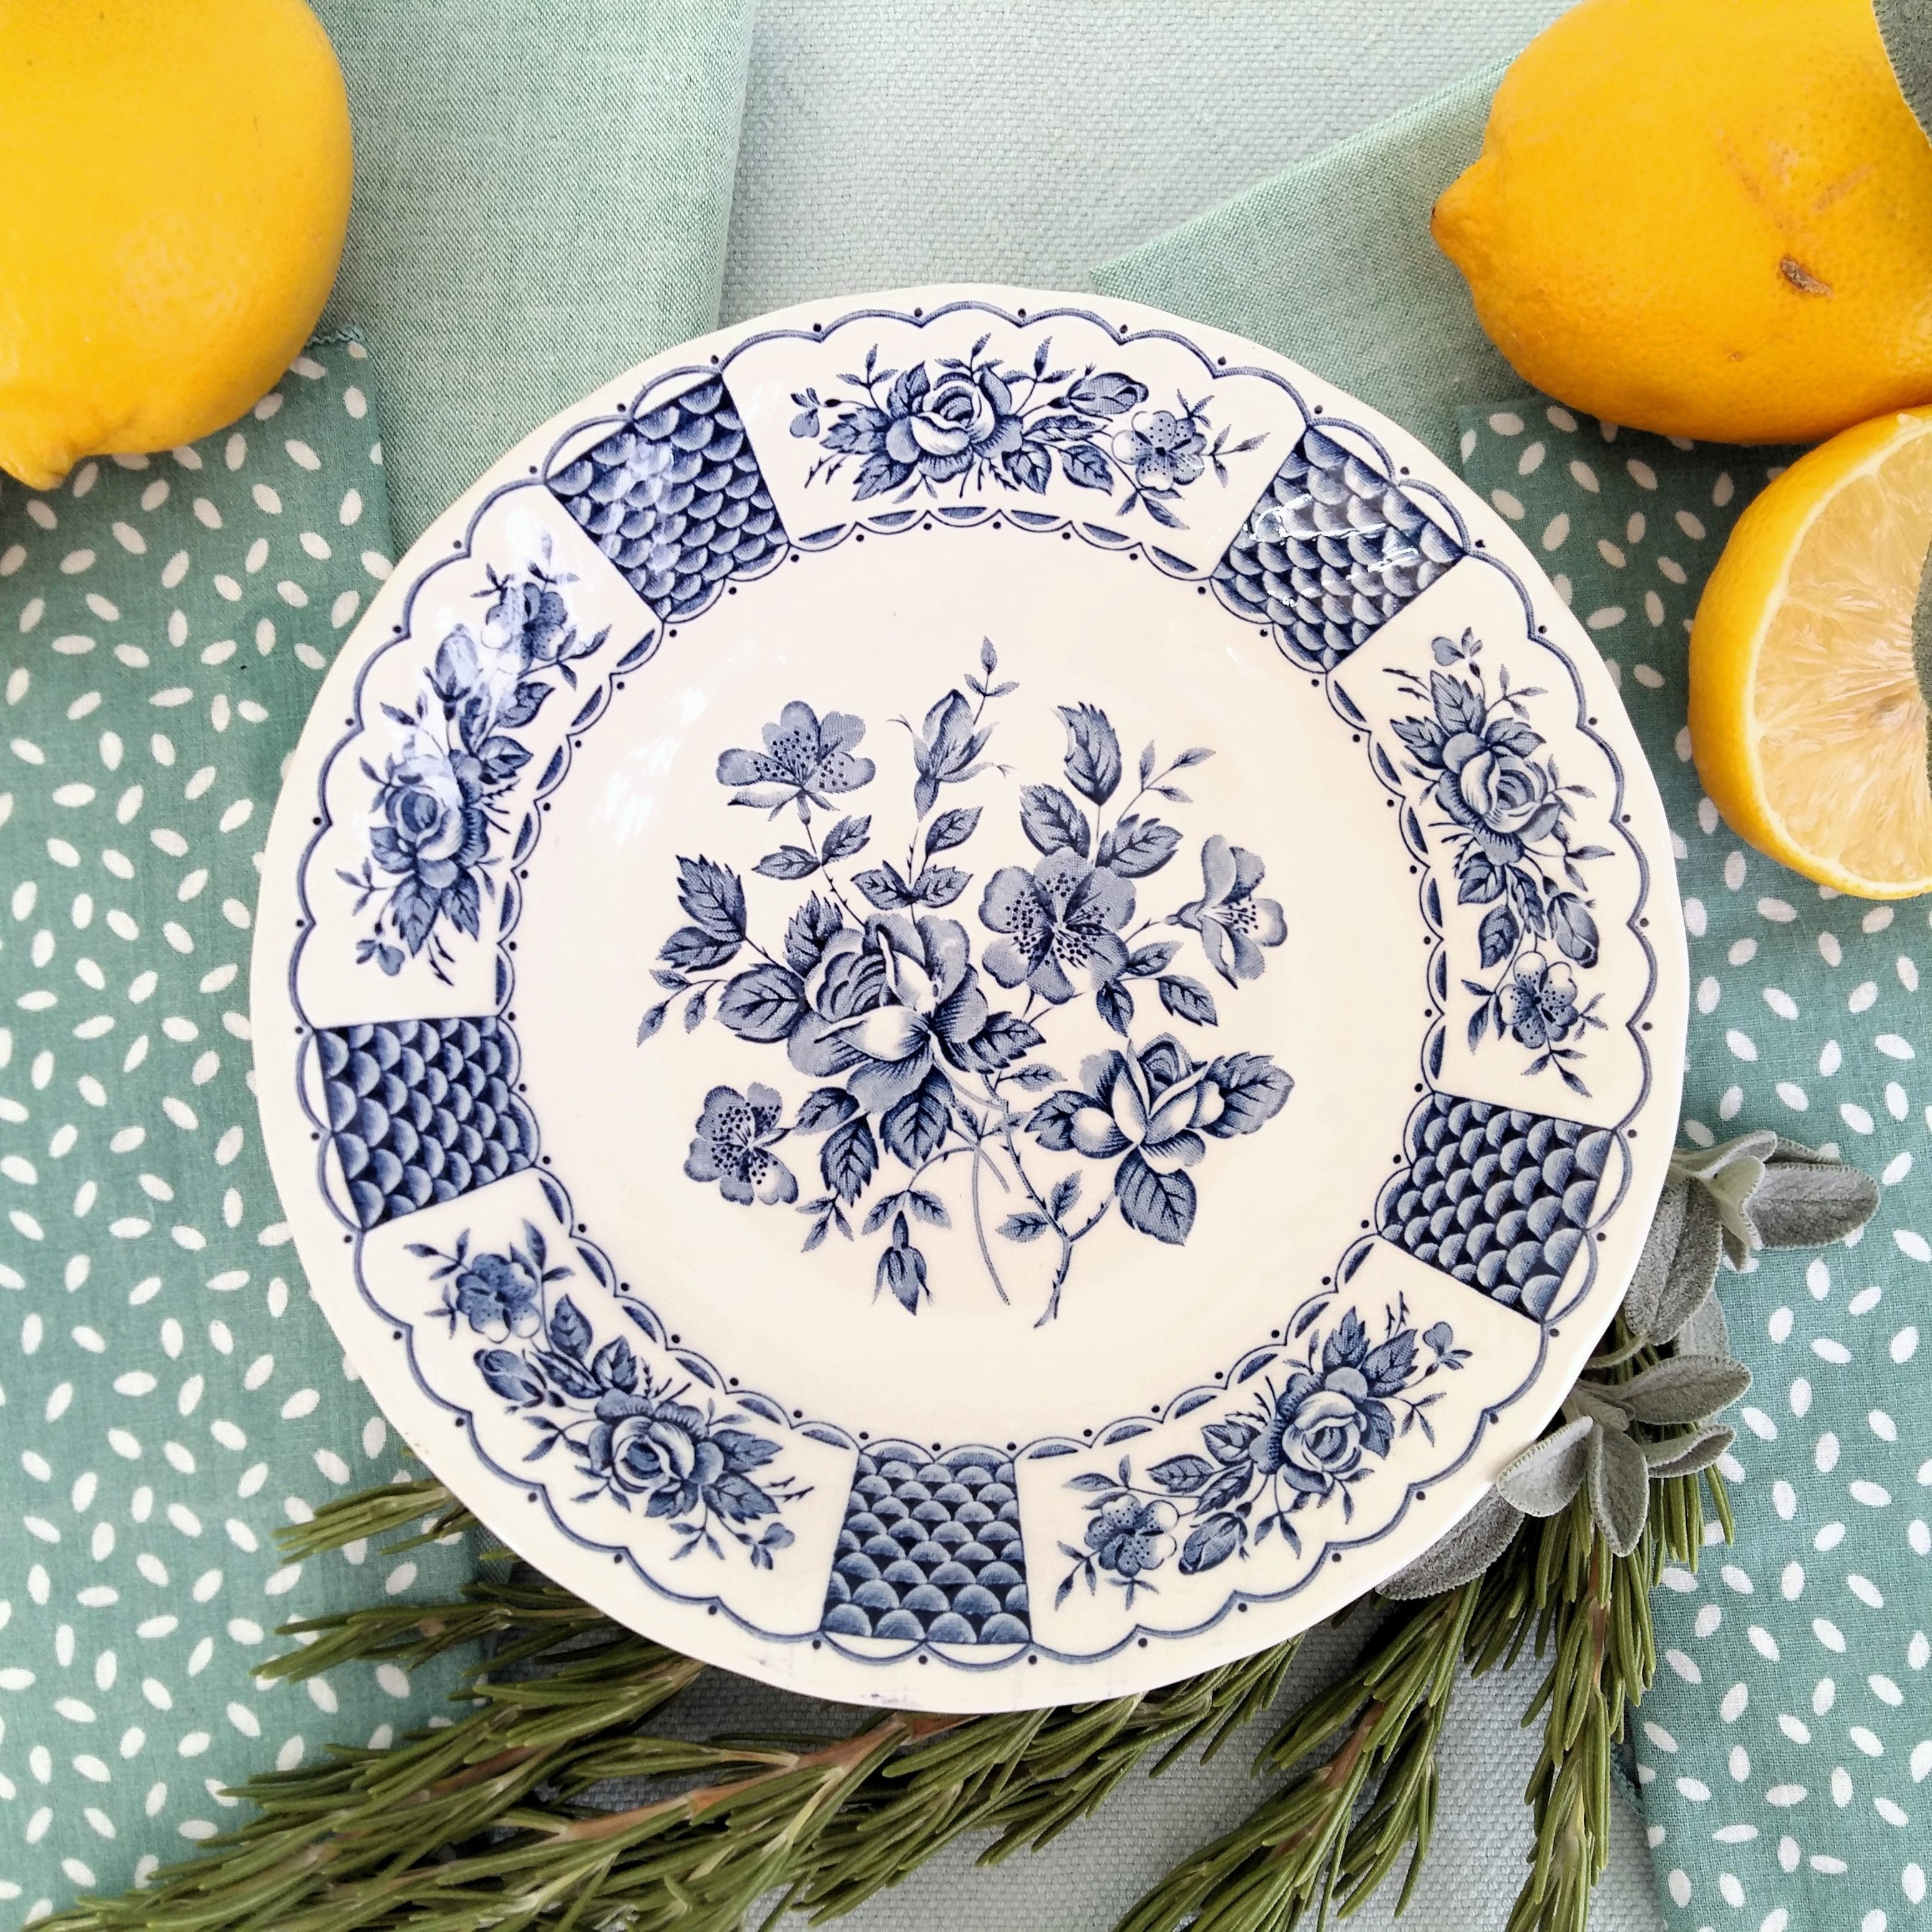 8 mix and match transferware plates and bowls from Tiggy and Pip